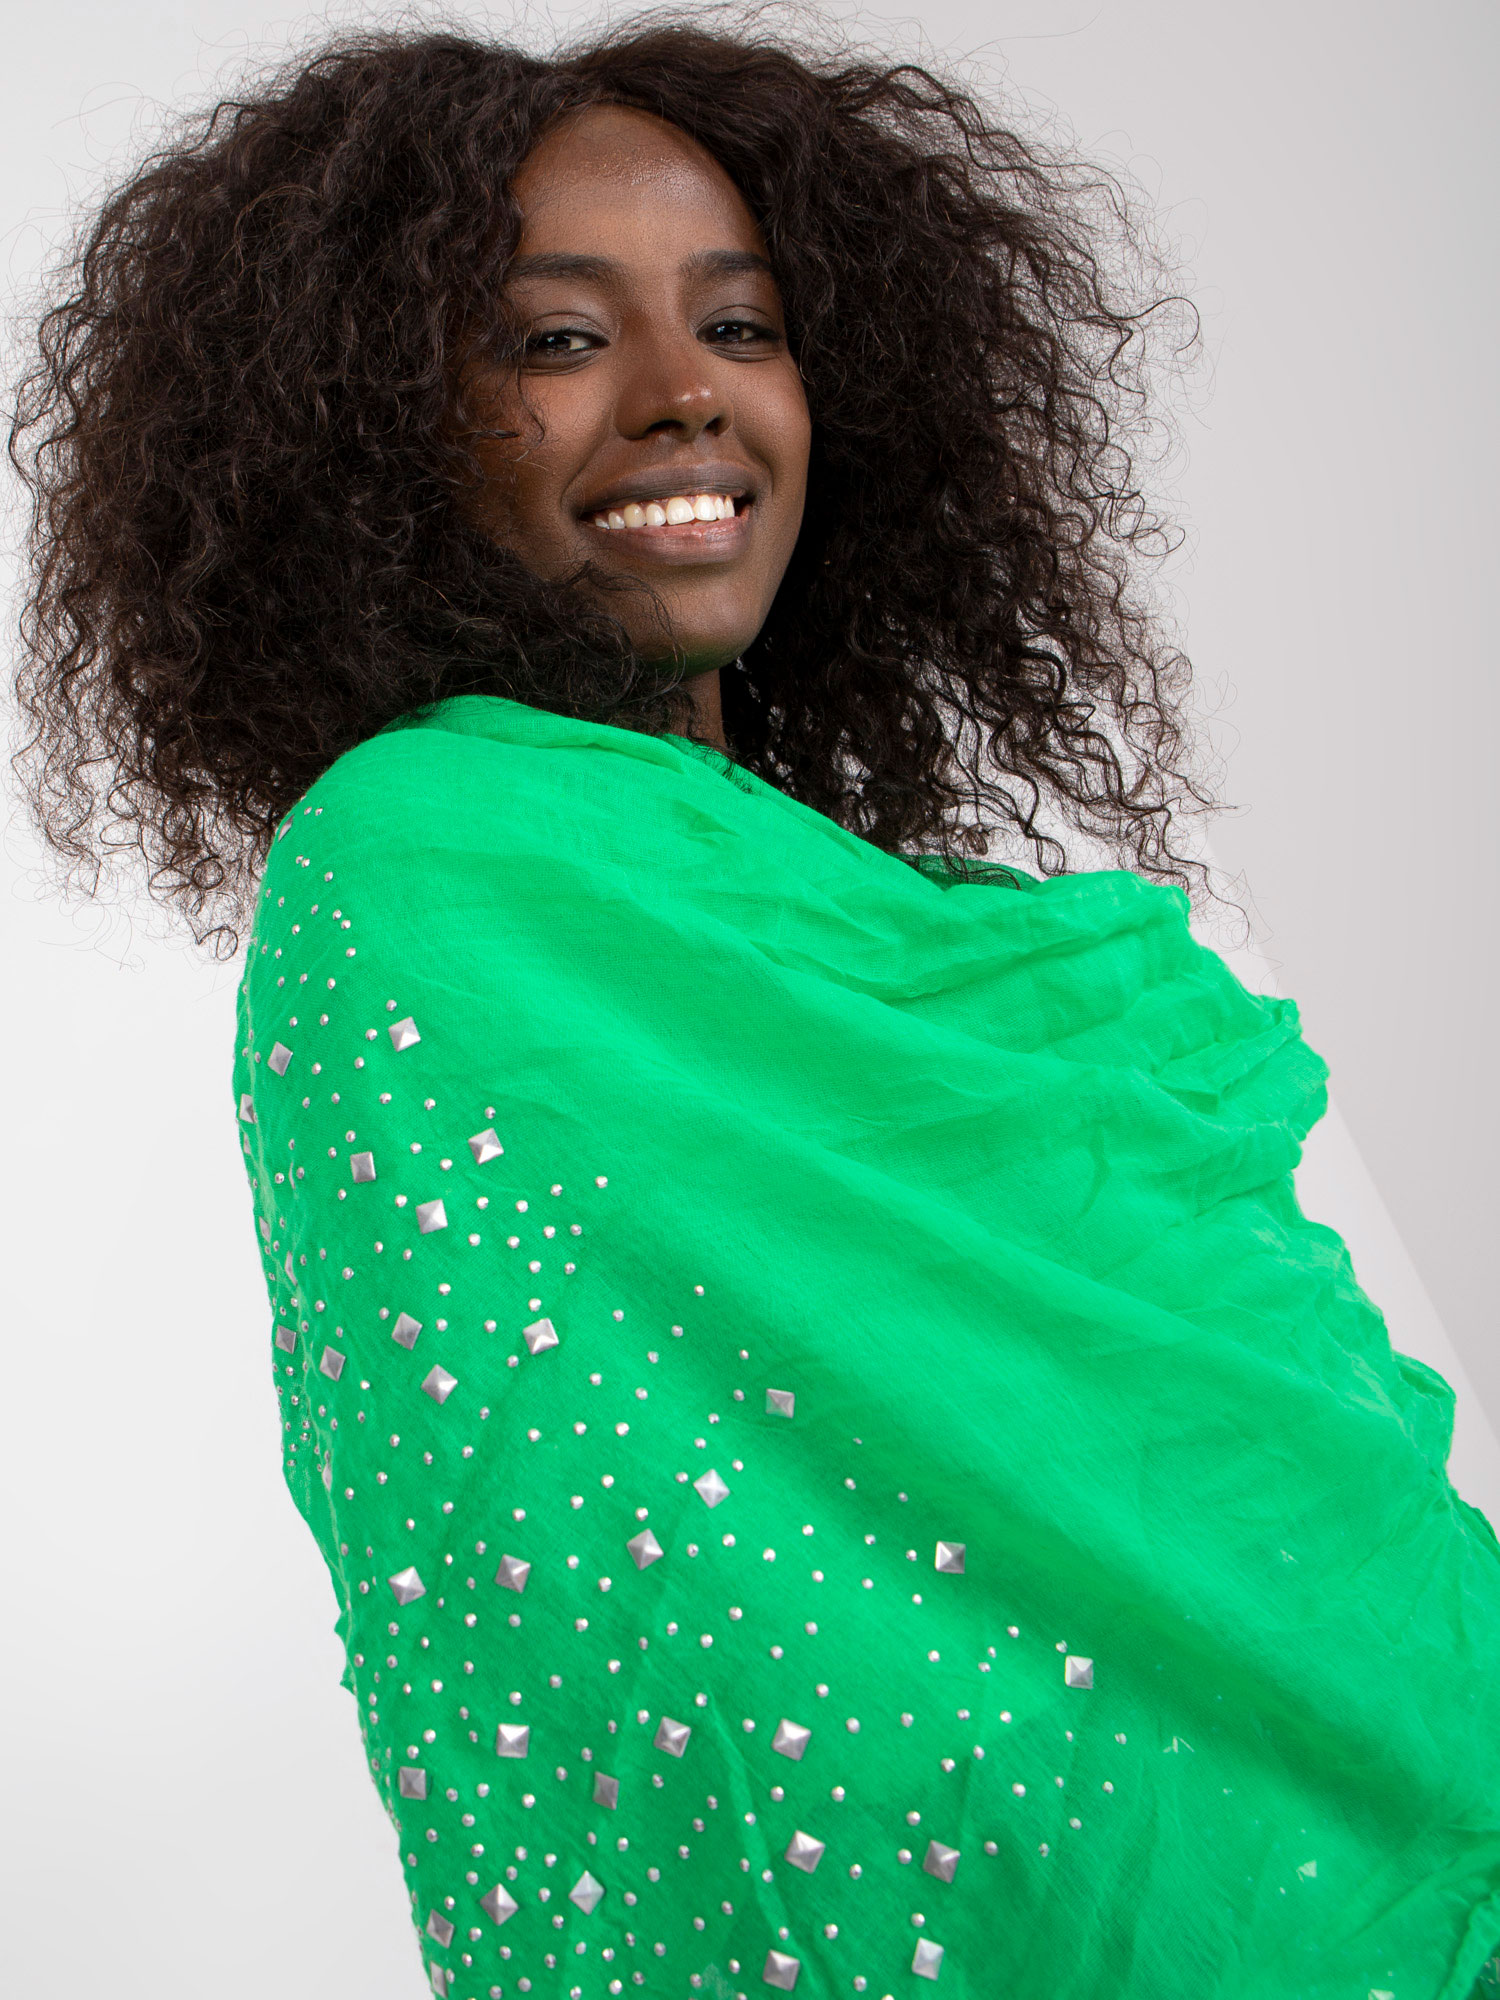 Green scarf with application of rhinestones